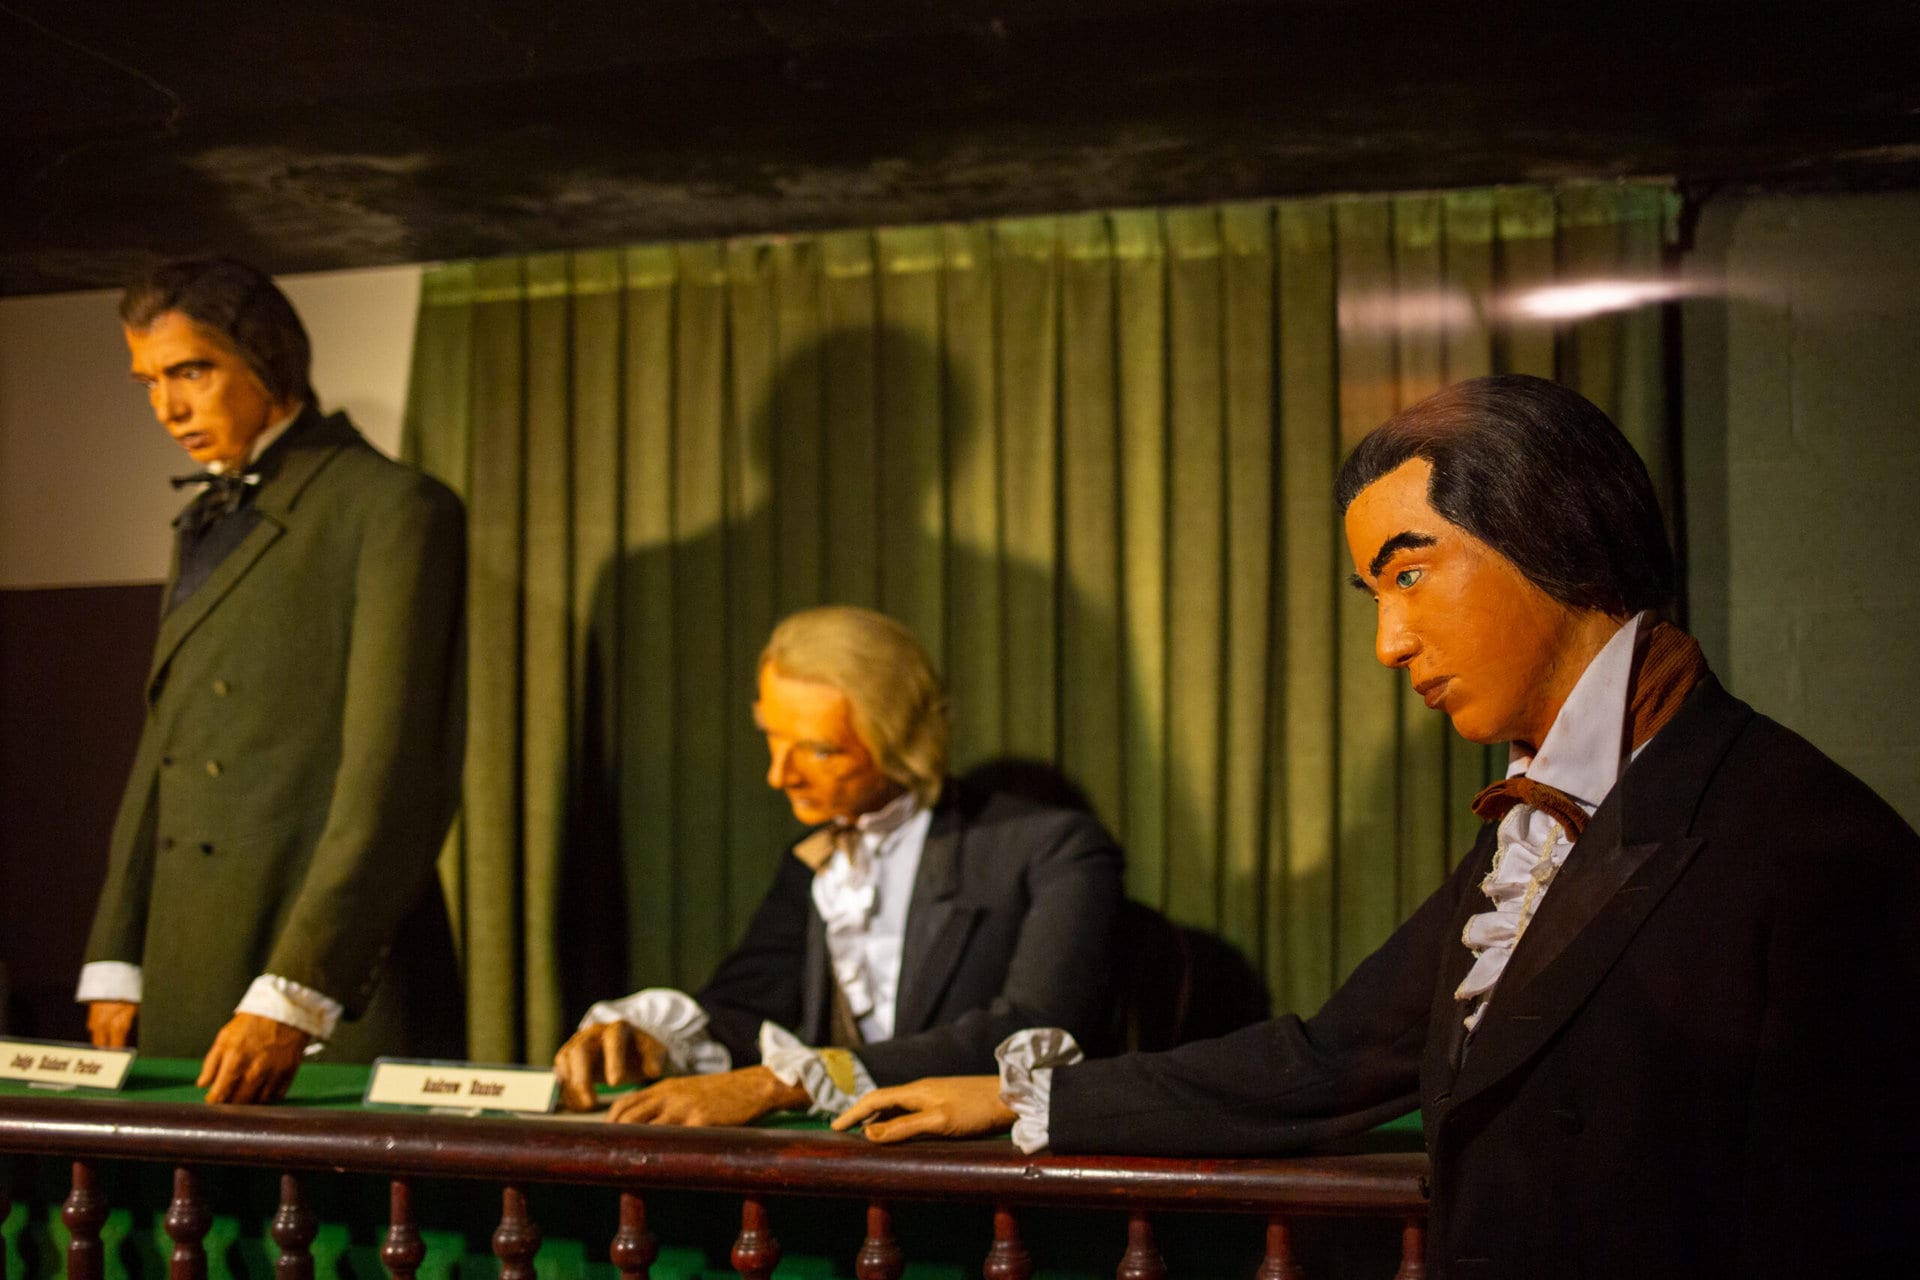 That's what makes a wax museum timeless